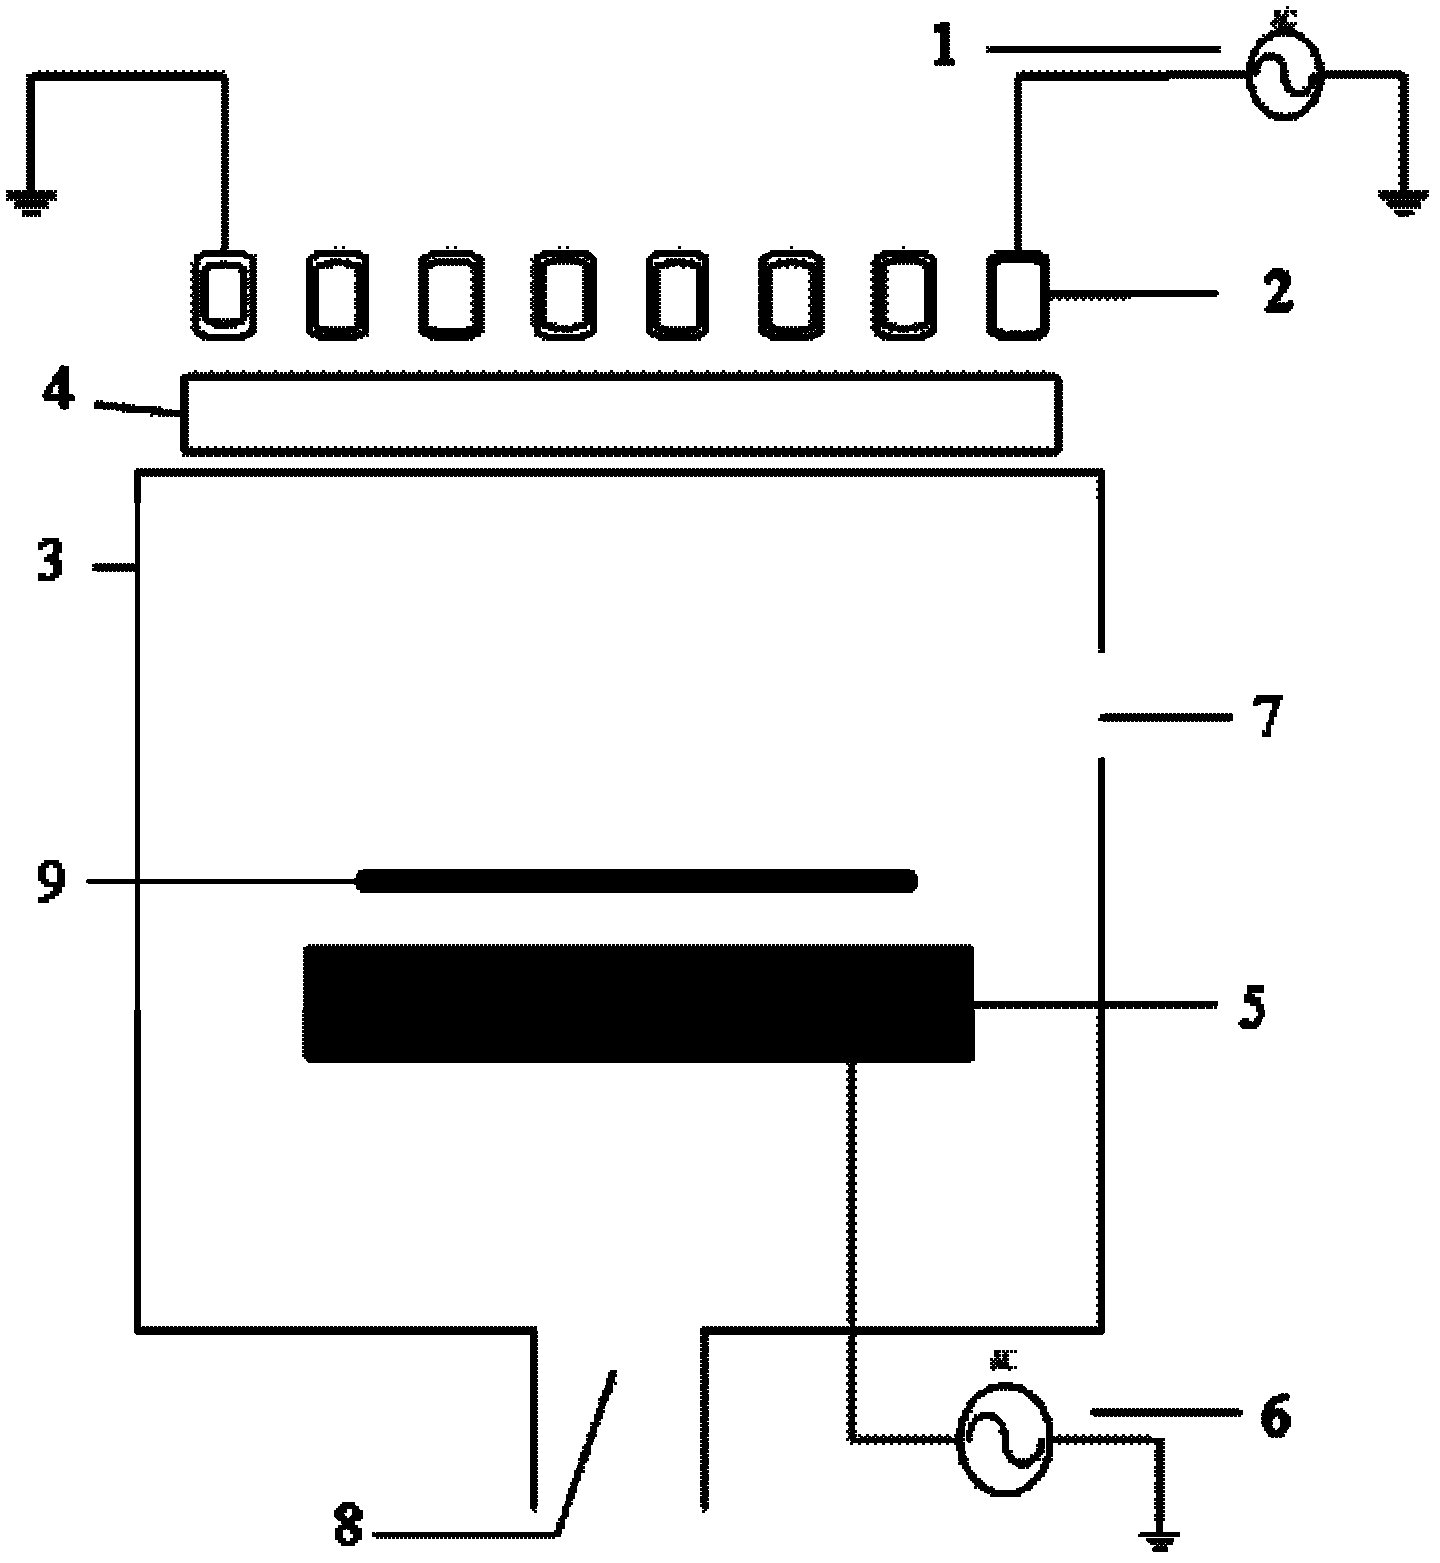 Inductive coupling plasma coil and plasma injection device